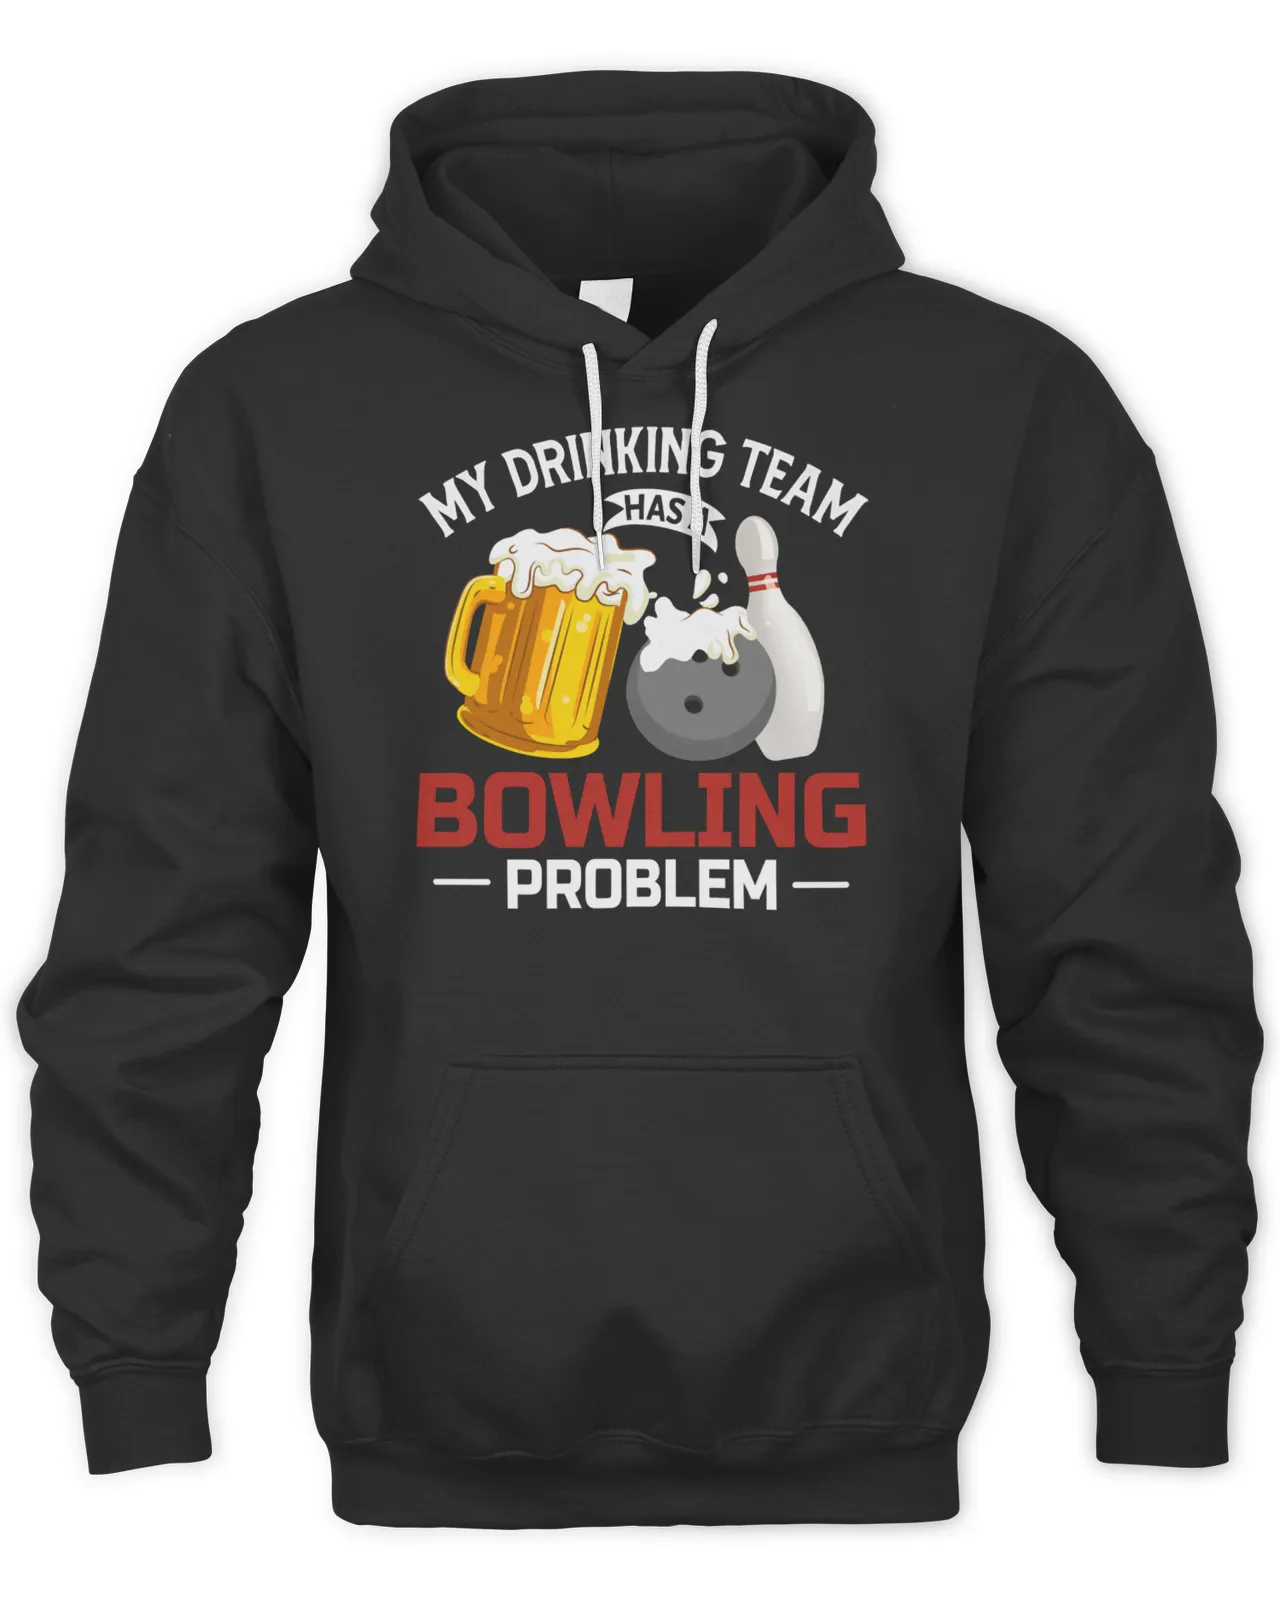 My Drinking Team Has A Bowling Problem Funny Beer Strike Shirt T 